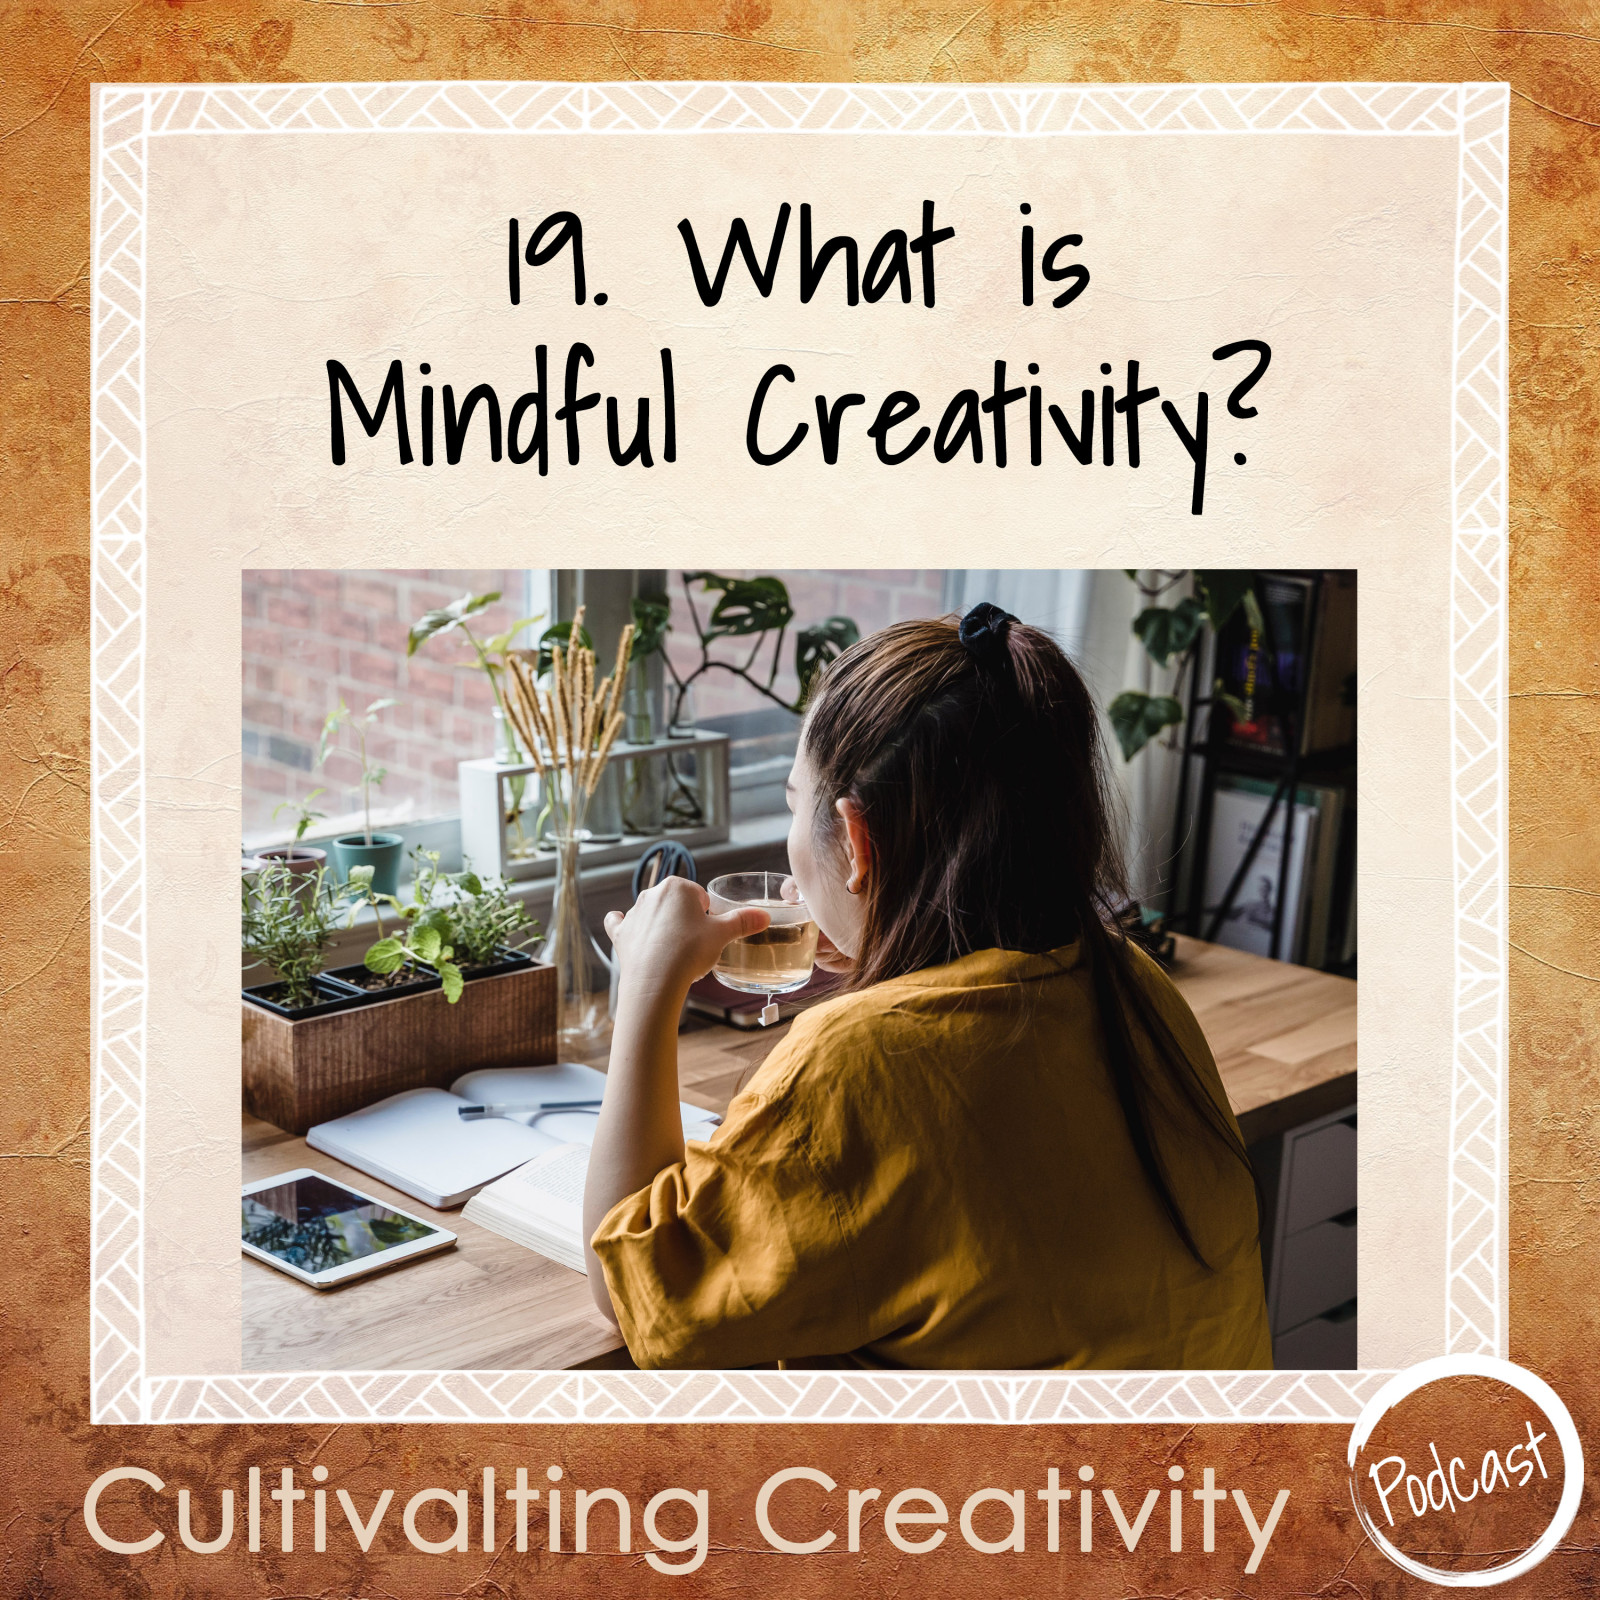 19. Your Guide to Mindful Creativity